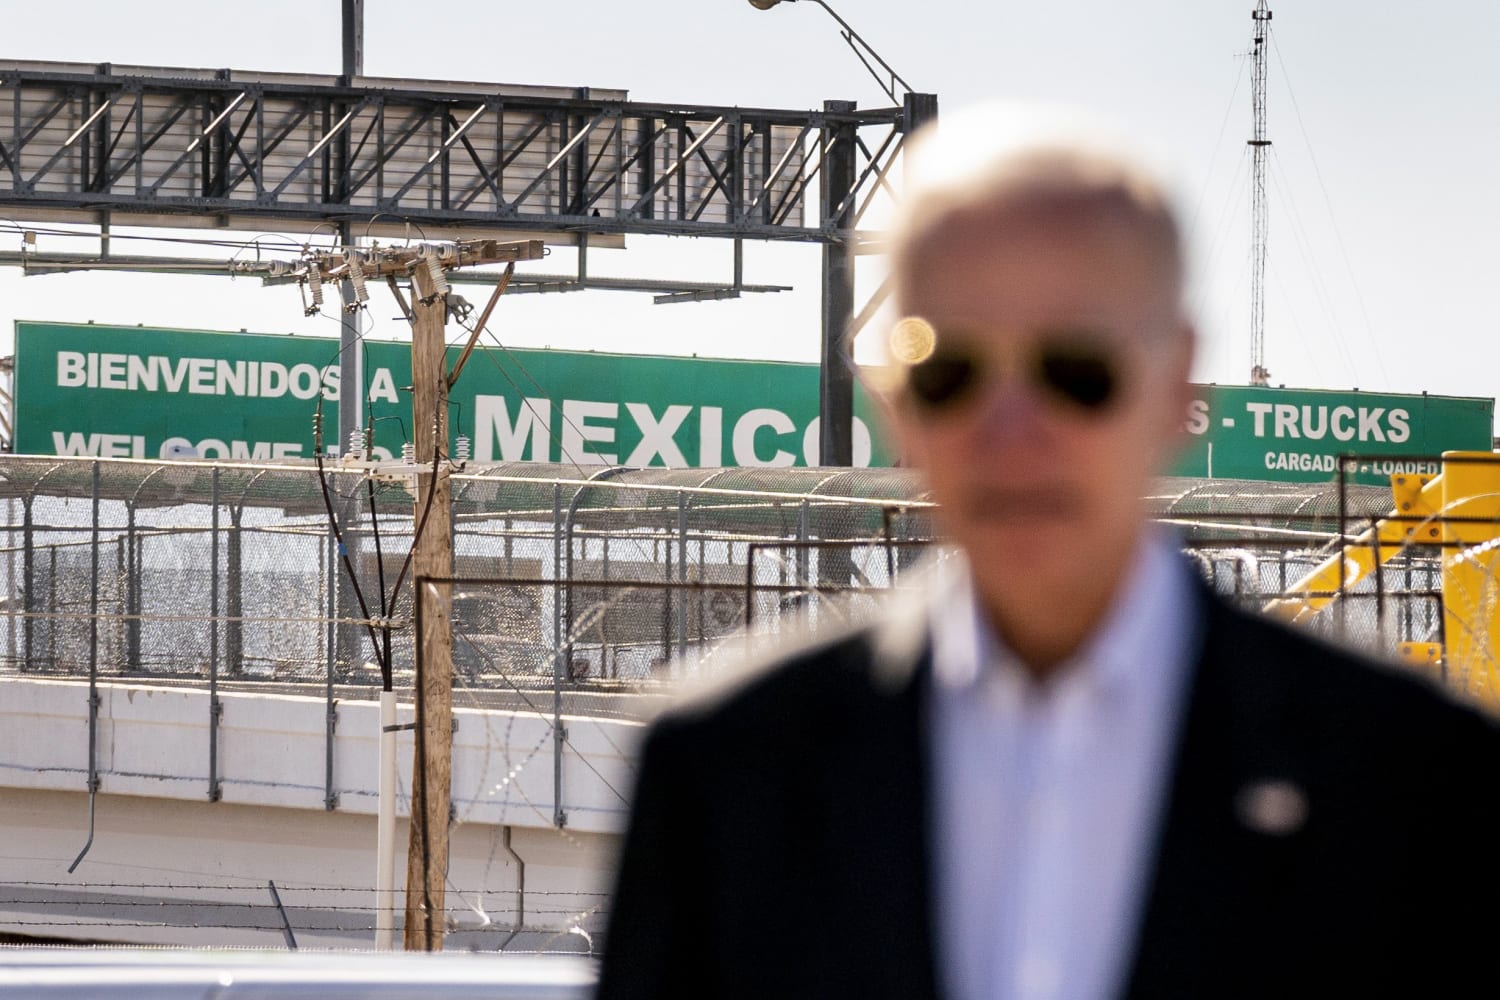 Biden visits U.S.-Mexico border as his administration imposes restrictions